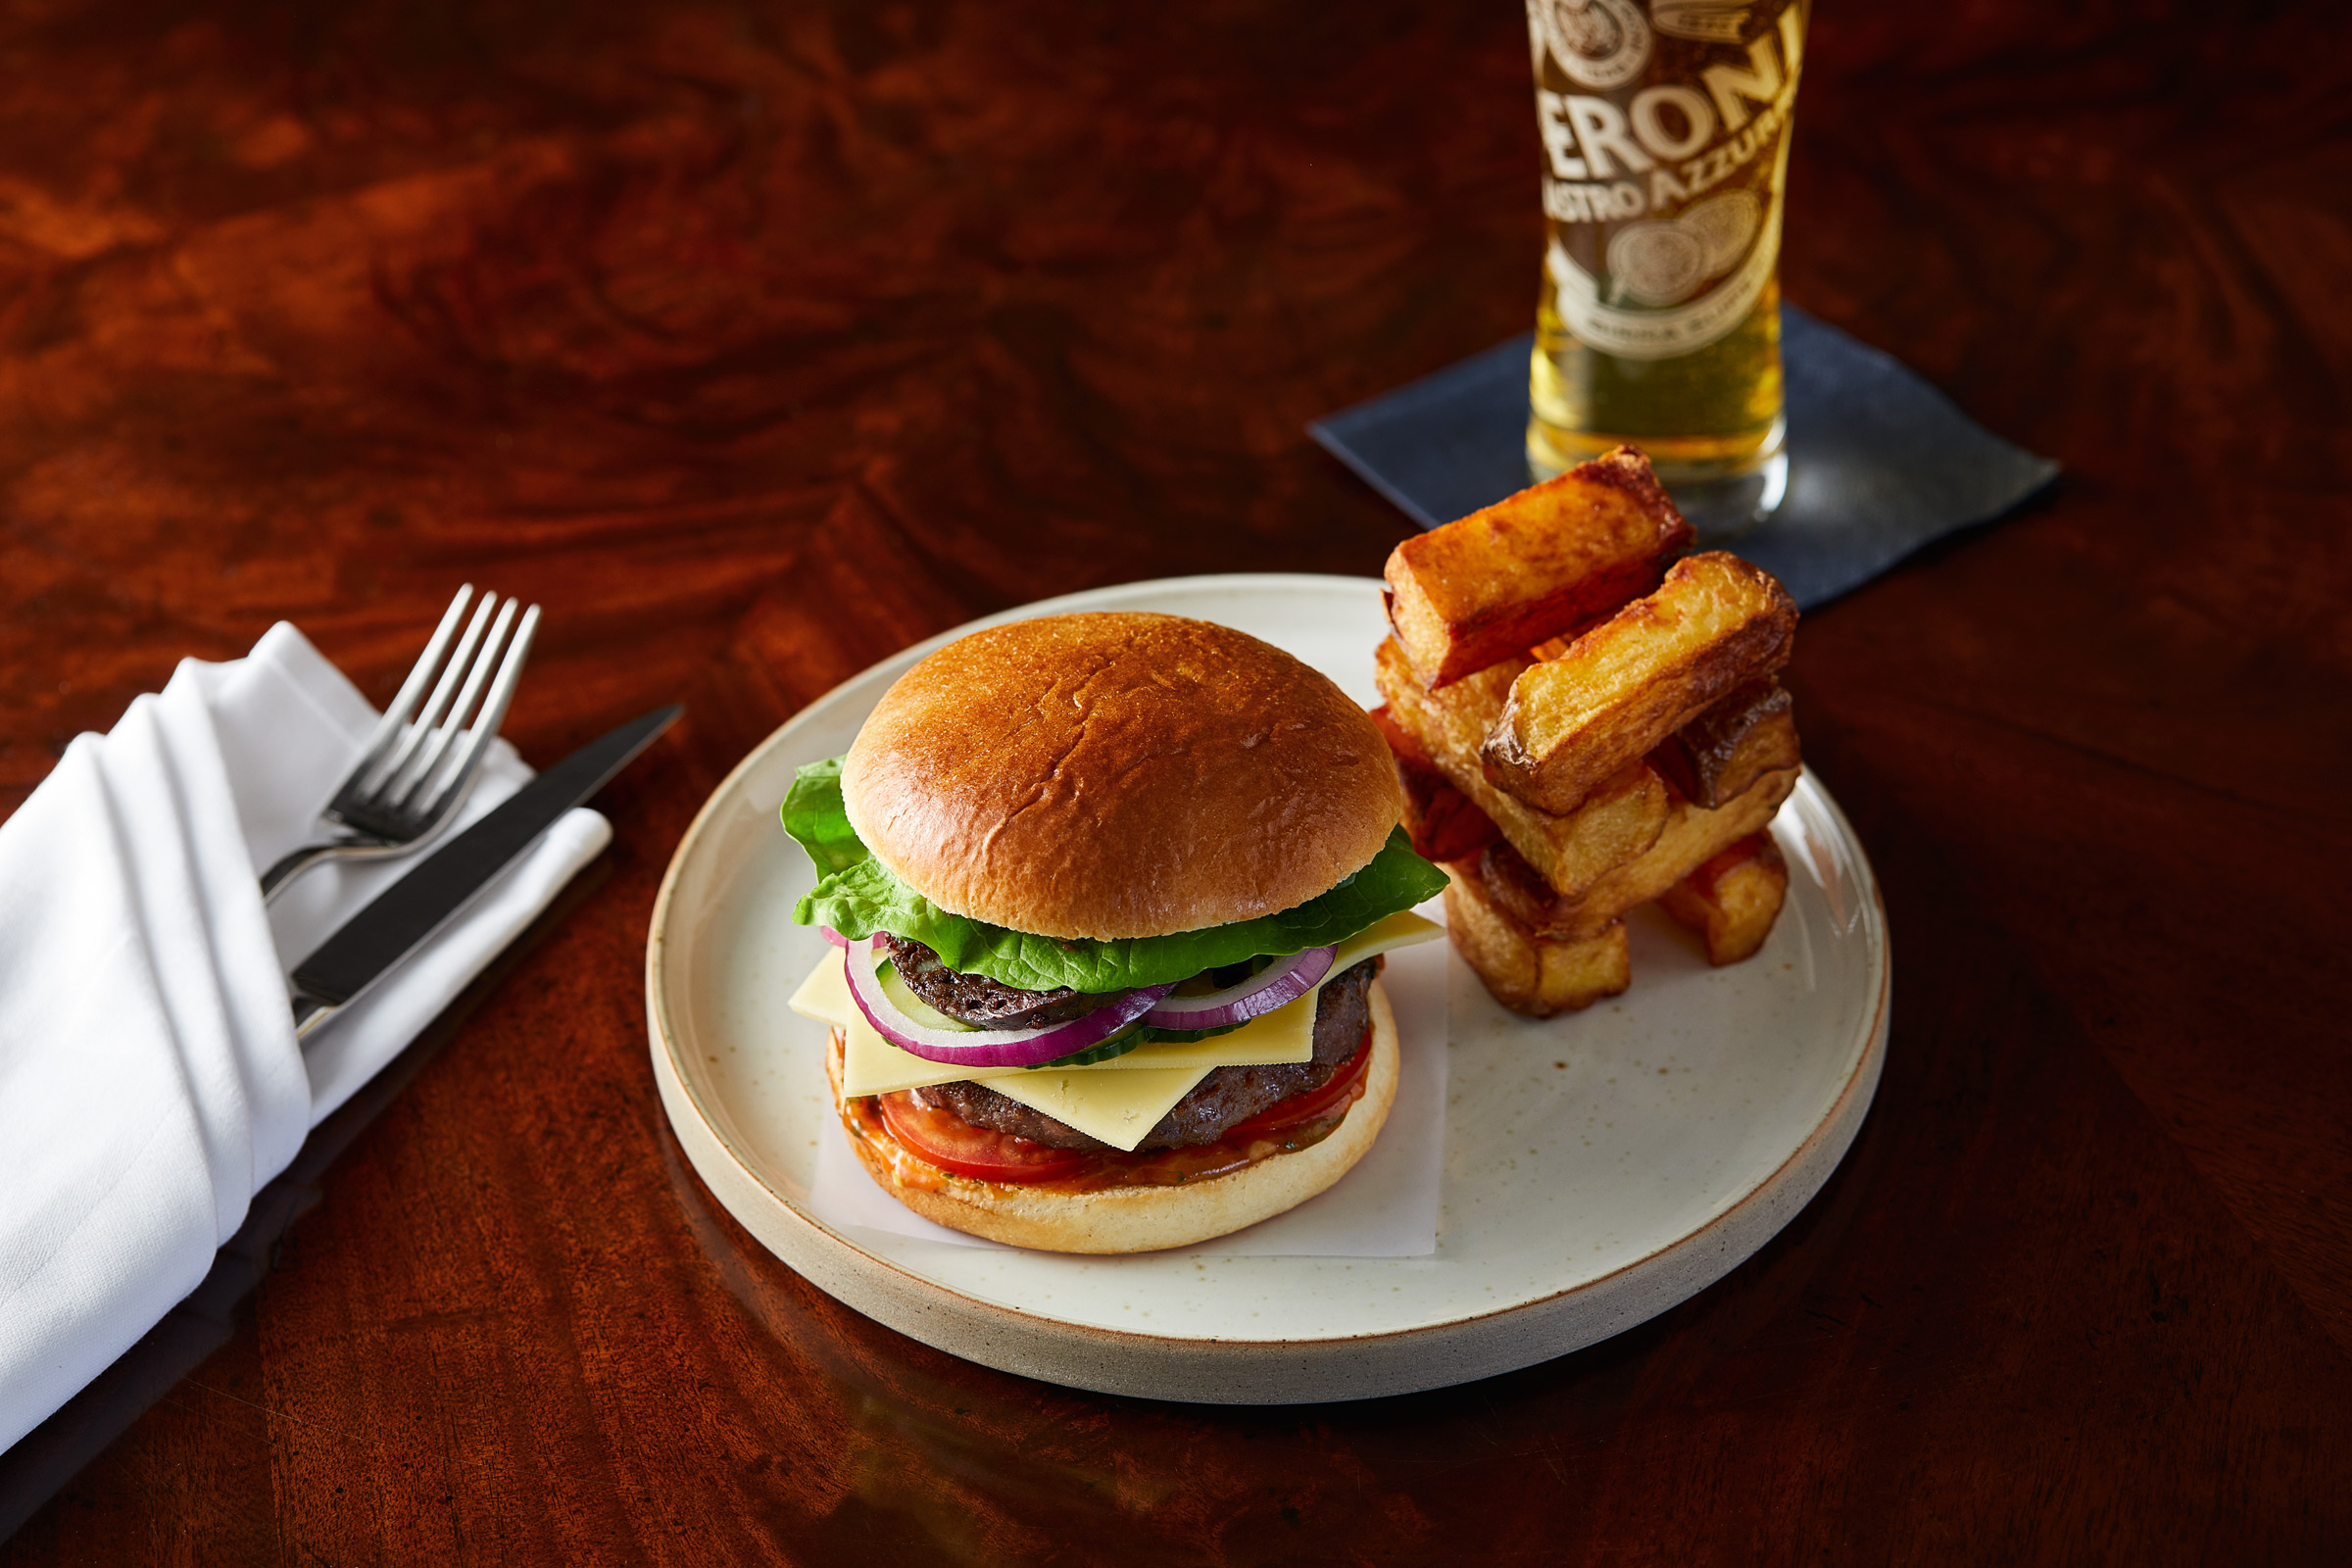 Black Pudding Burger with a pint of Peroni at Macdonald Drumossie Hotel, Alastair Ferrier photographer.